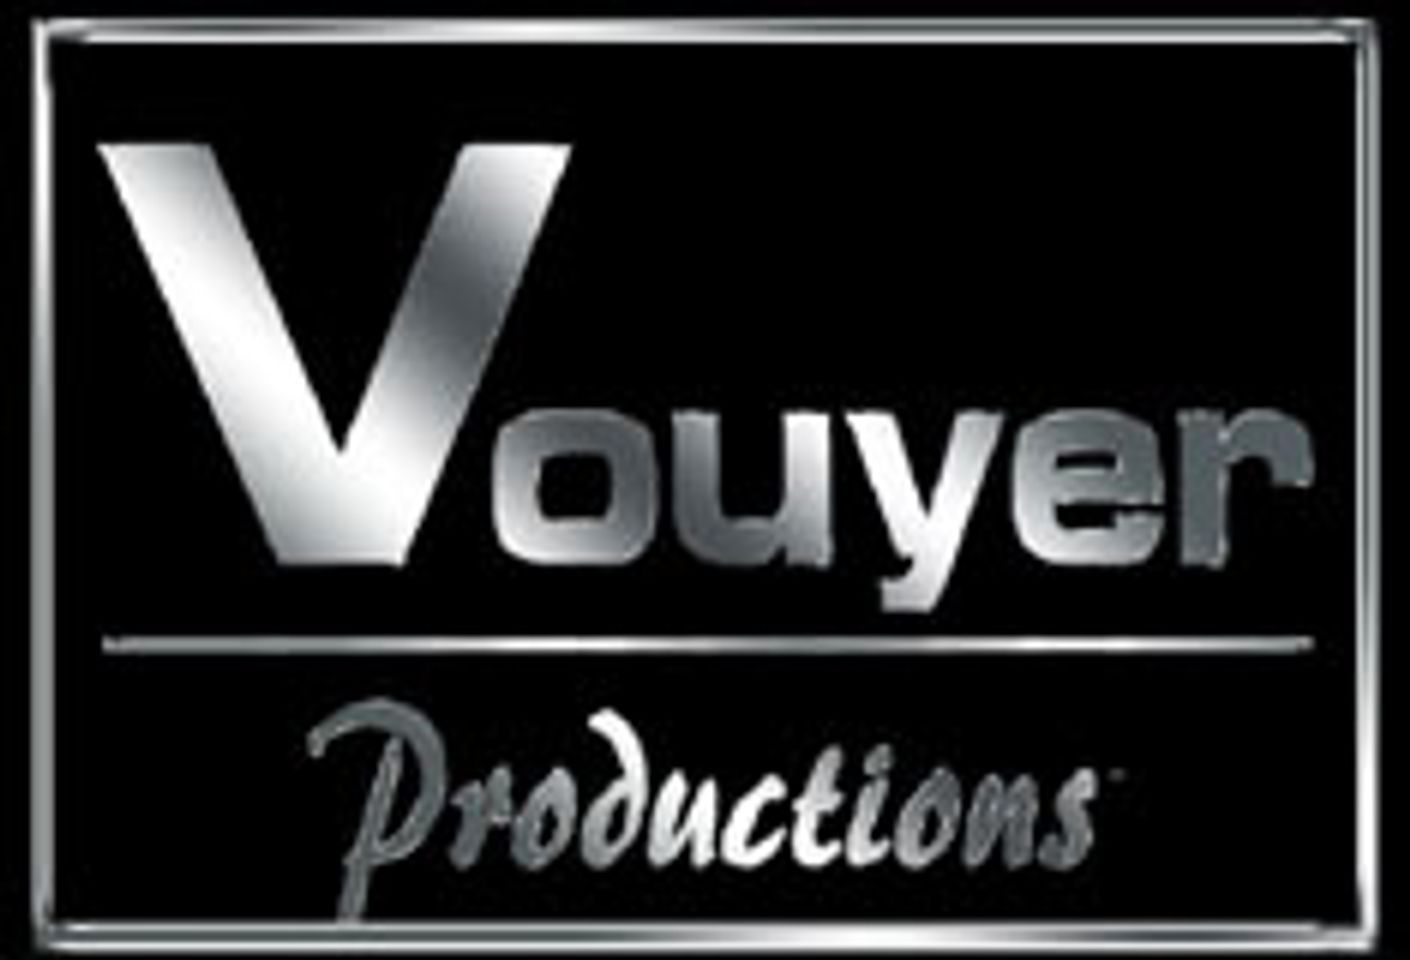 Vouyer Productions to Sponsor Frank Trigg at Ultimate Fighting Championship